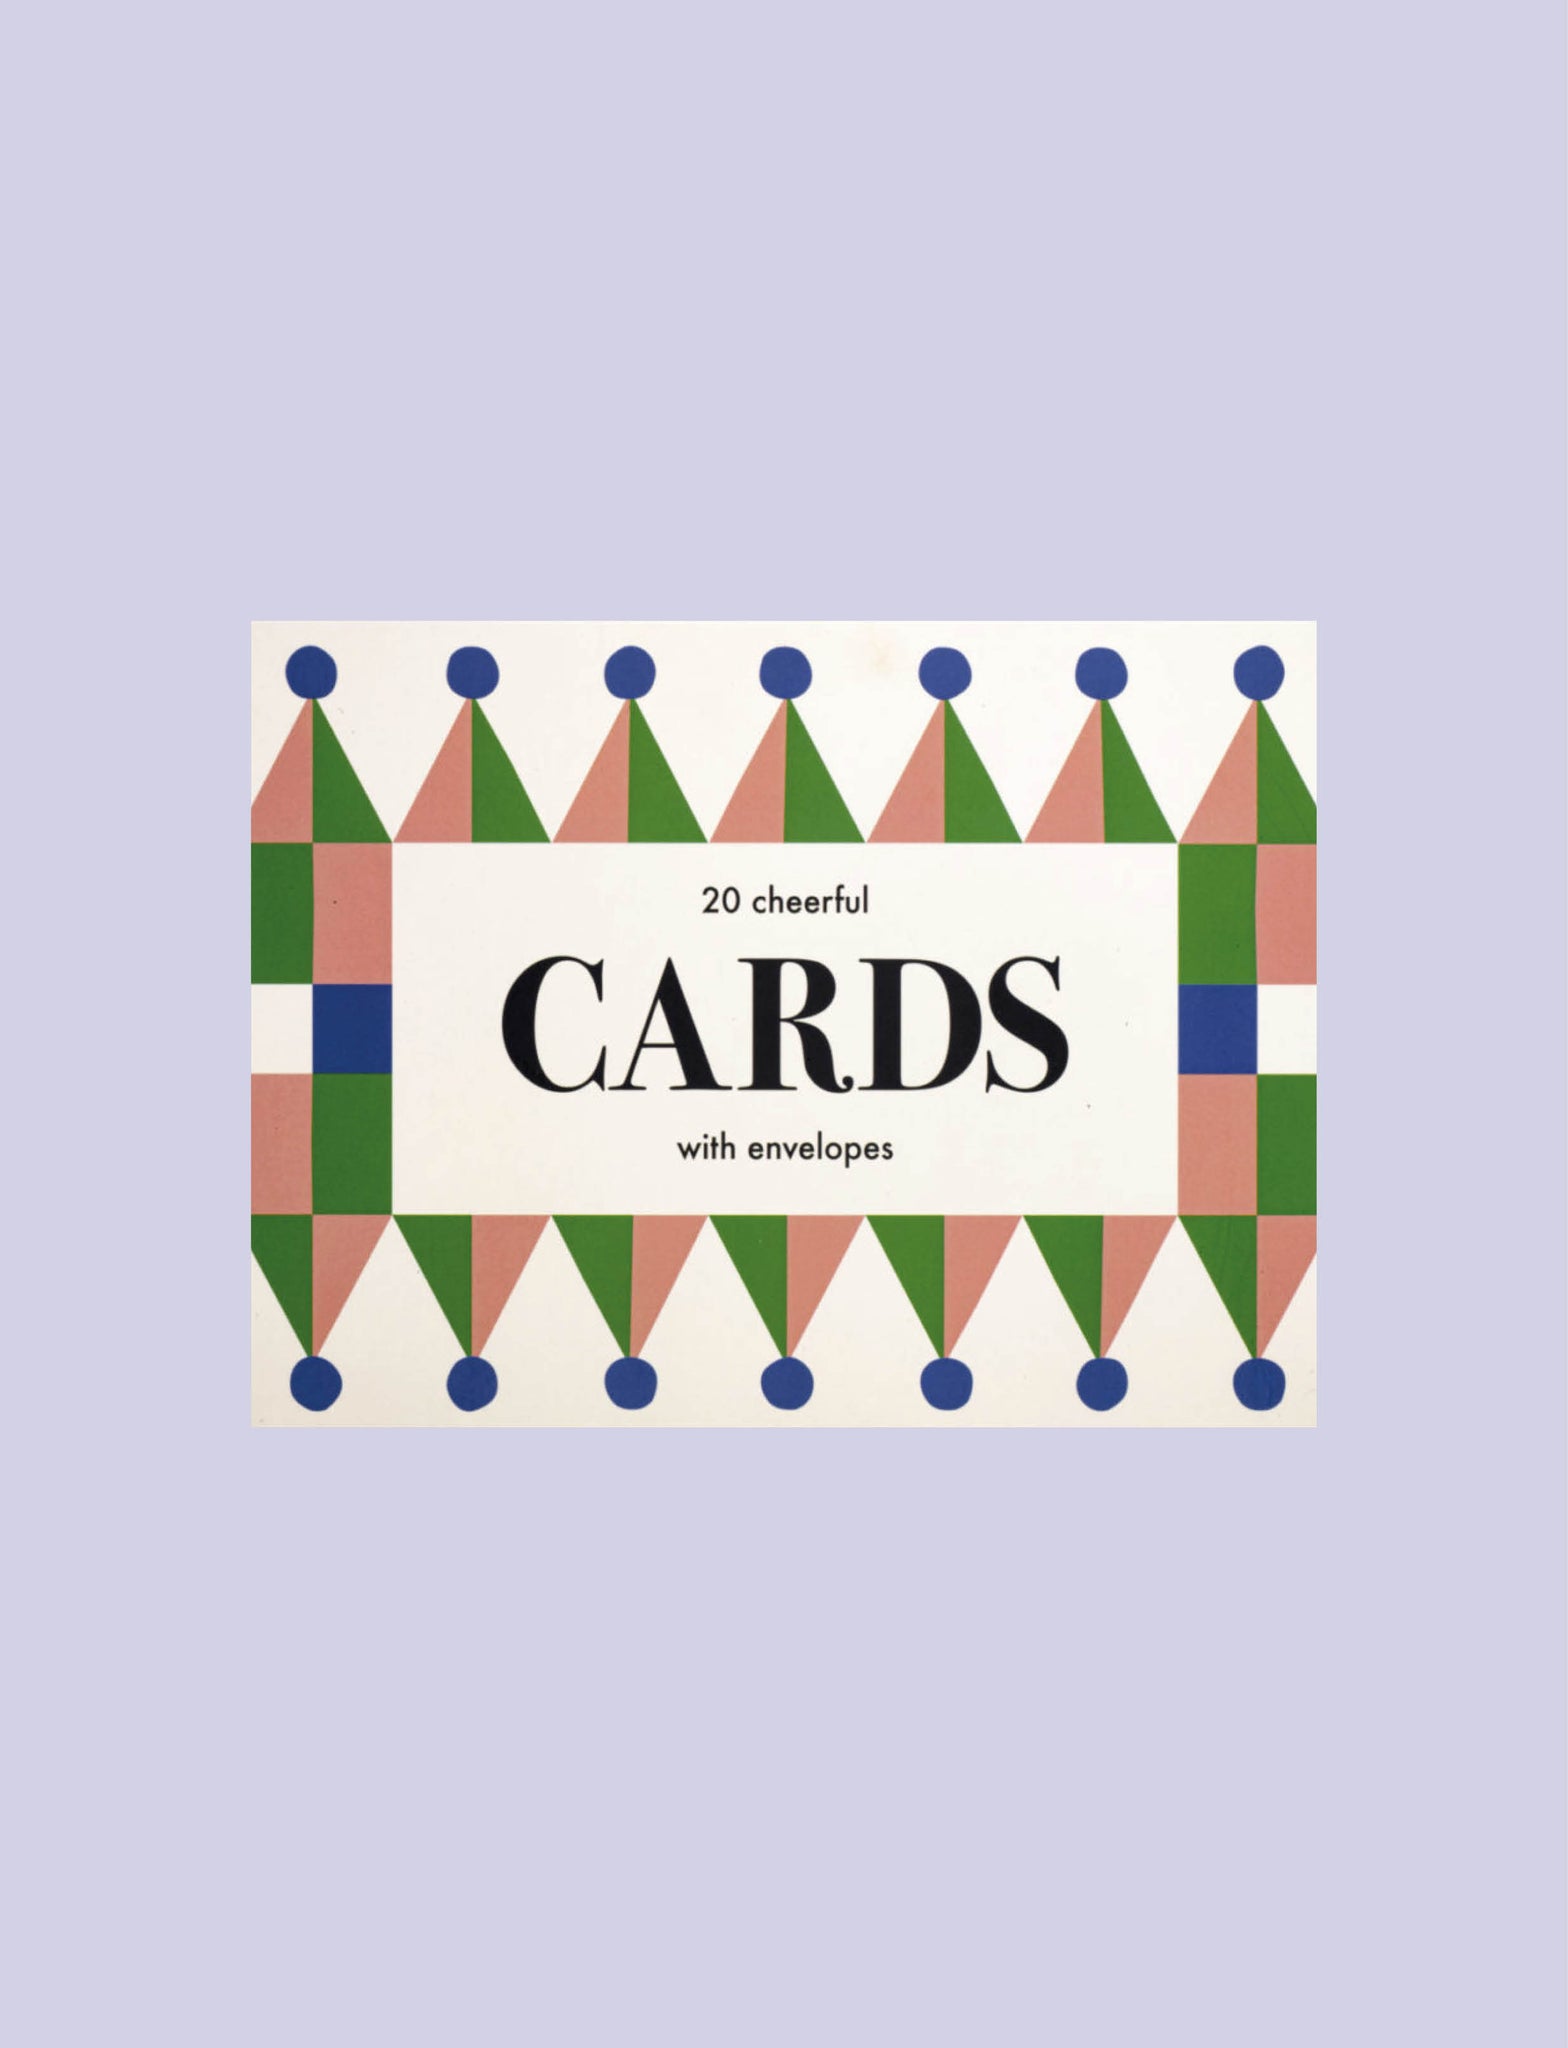 Cheerful cards